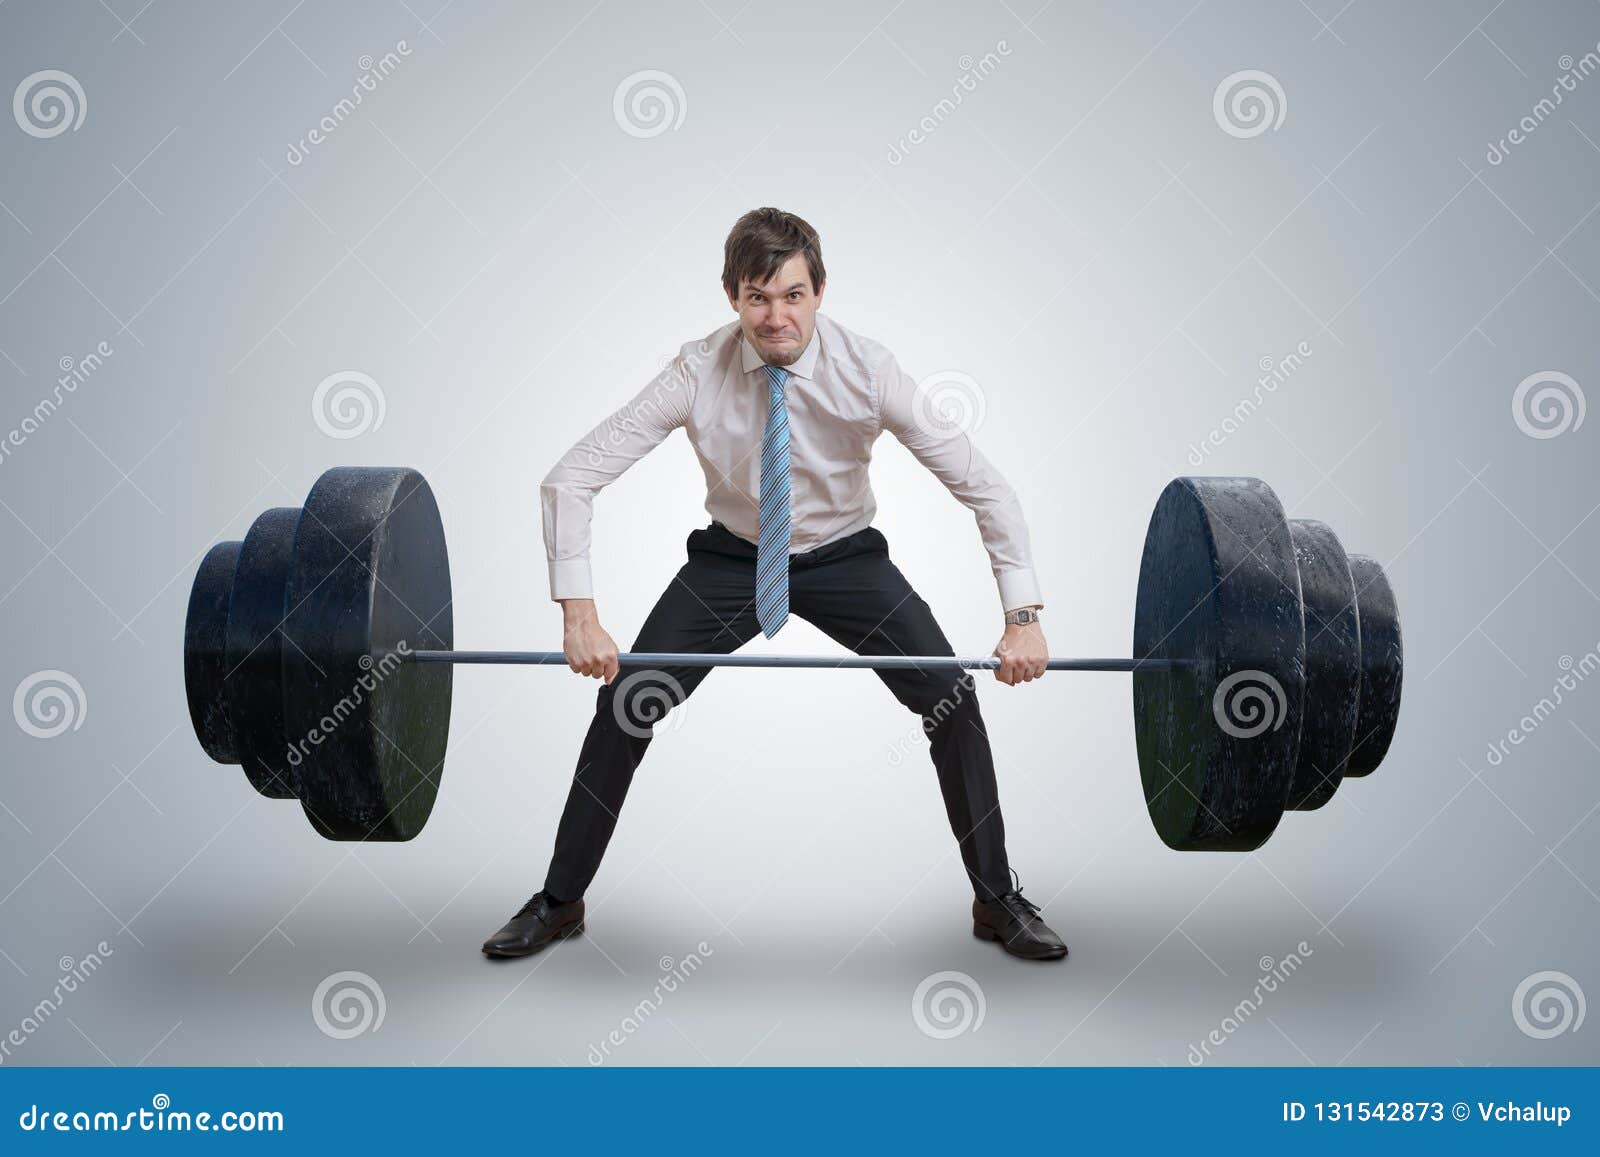 young businessman in shirt is lifting heavy weights.